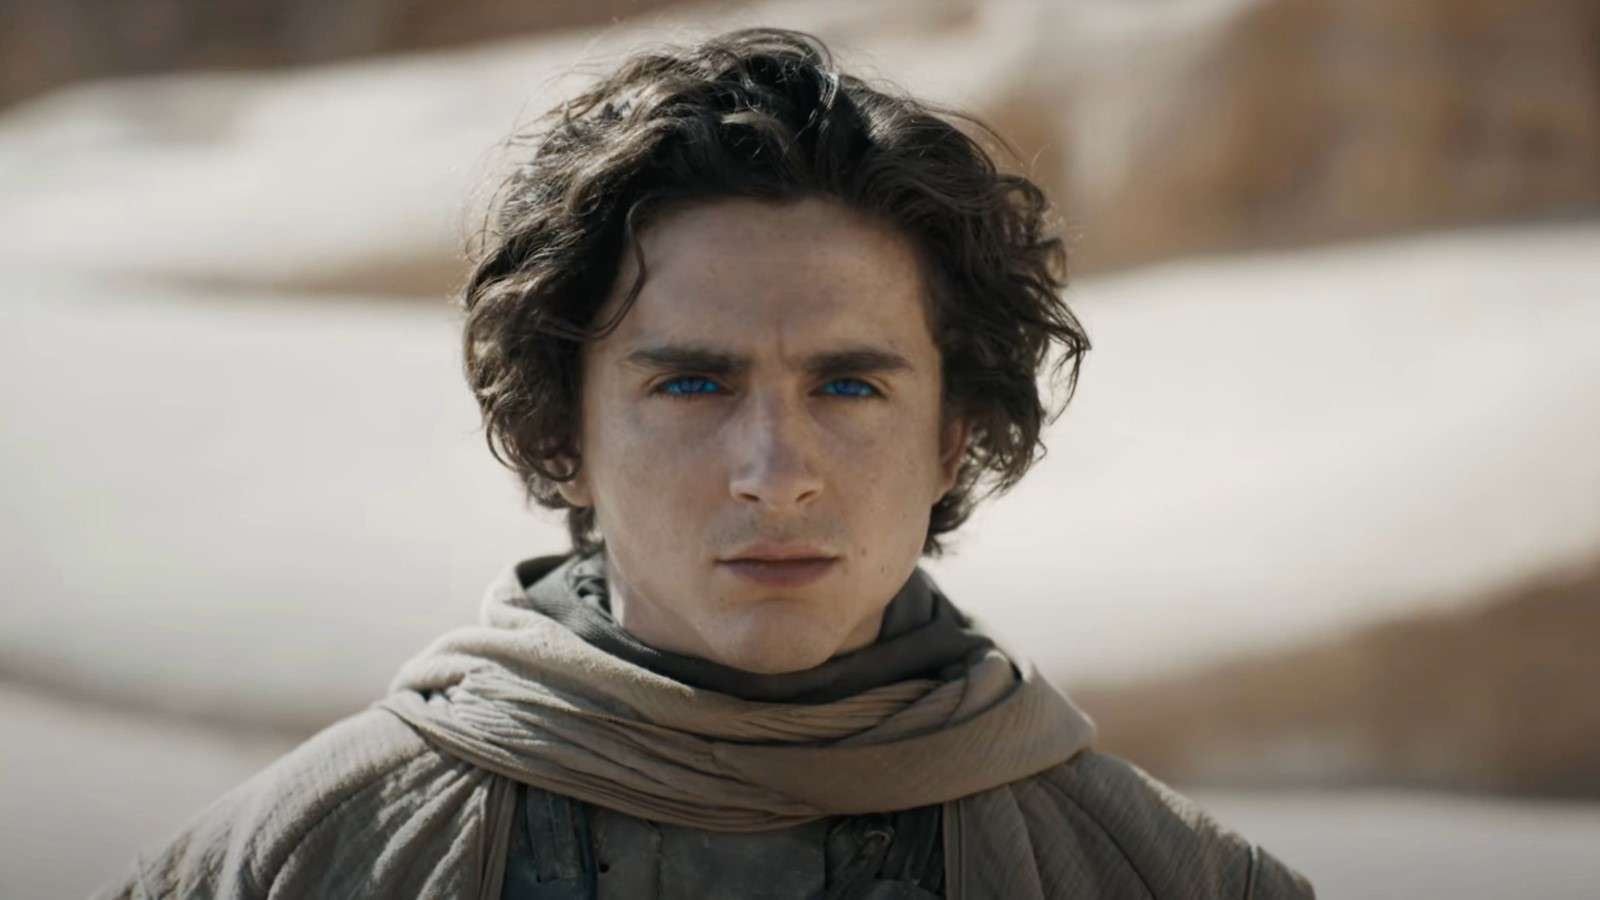 Dune: Timothée Chalamet as Paul standing in the desert and looking towards the camera